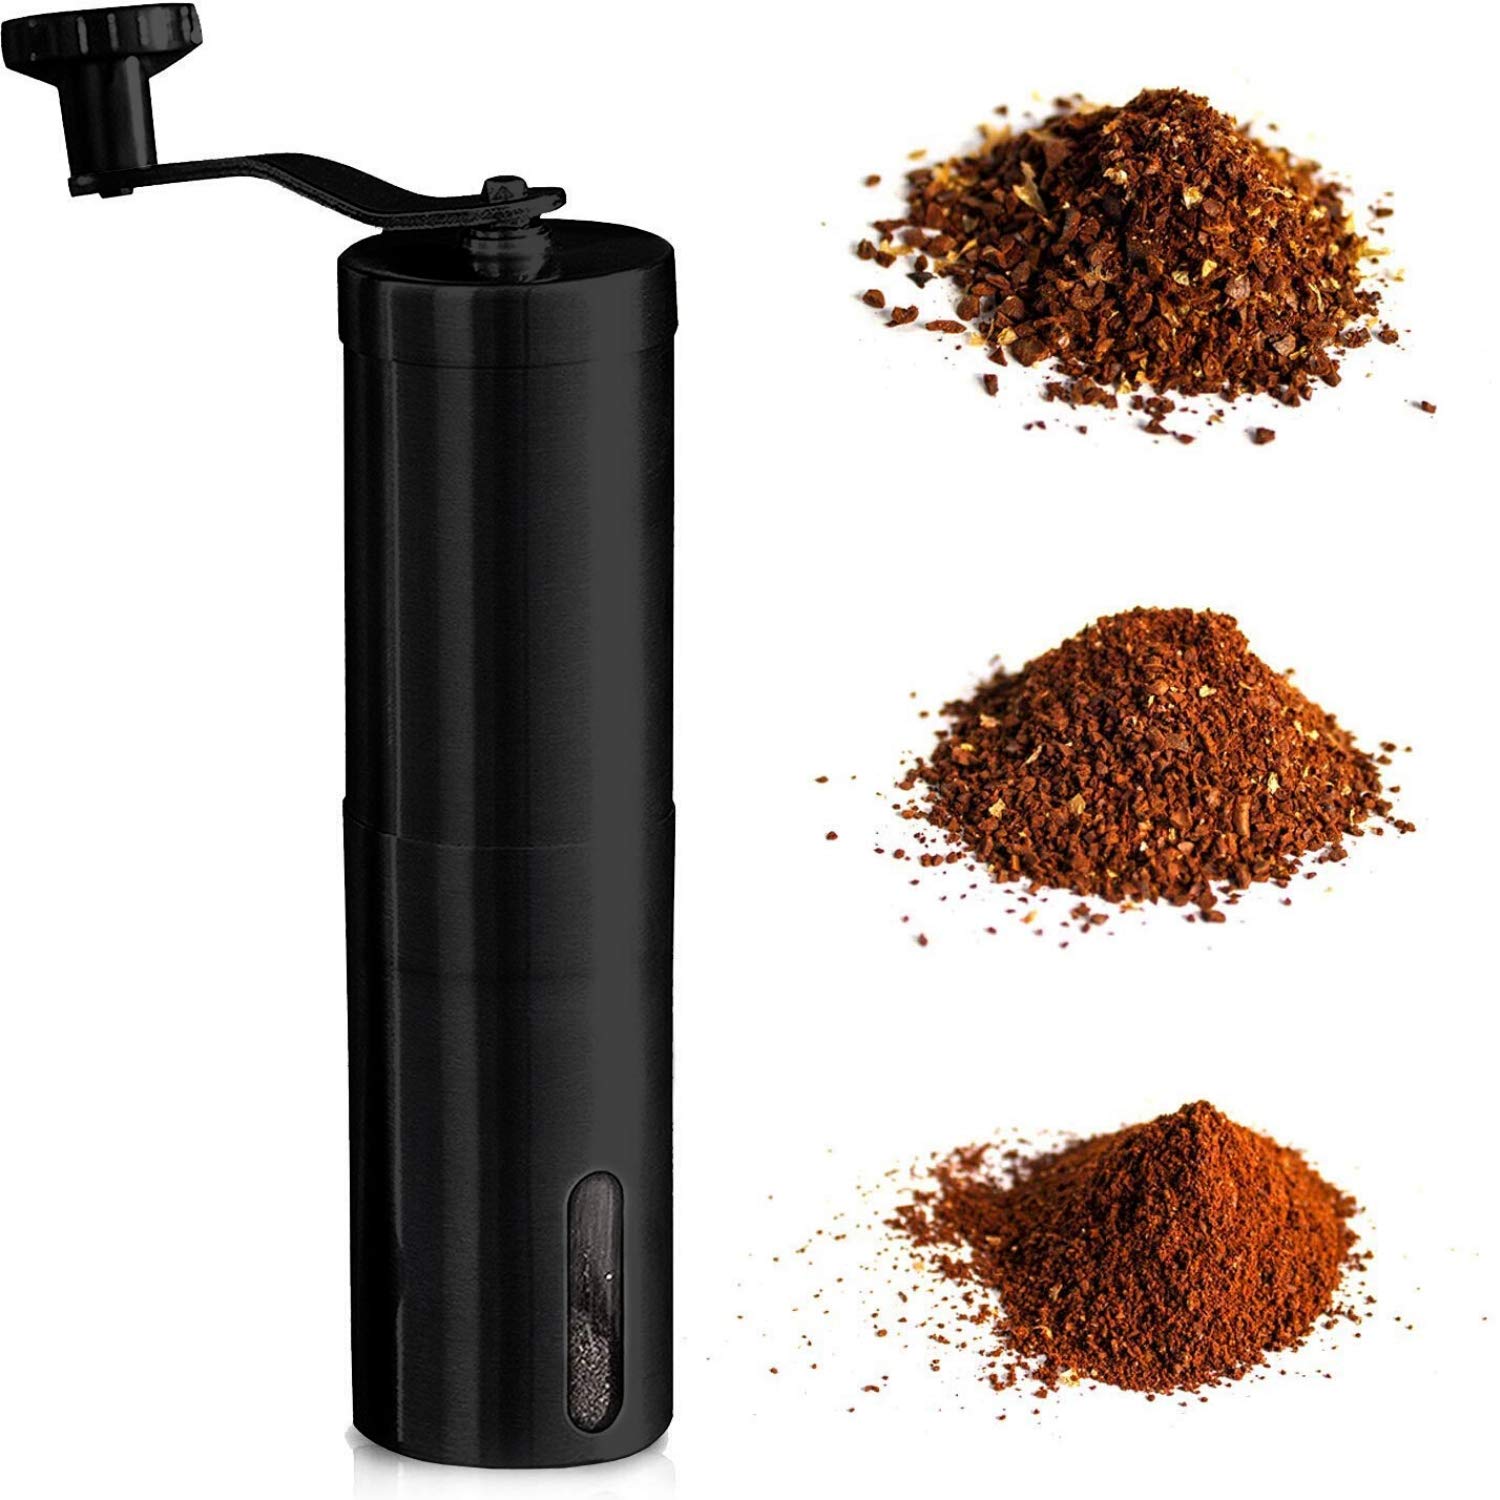 InstaCuppa Manual Coffee Grinder with Adjustable Setting – Conical Ceramic Burr Mill & Brushed Stainless Steel – Burr Coffee Grinder for Pour Over Drip